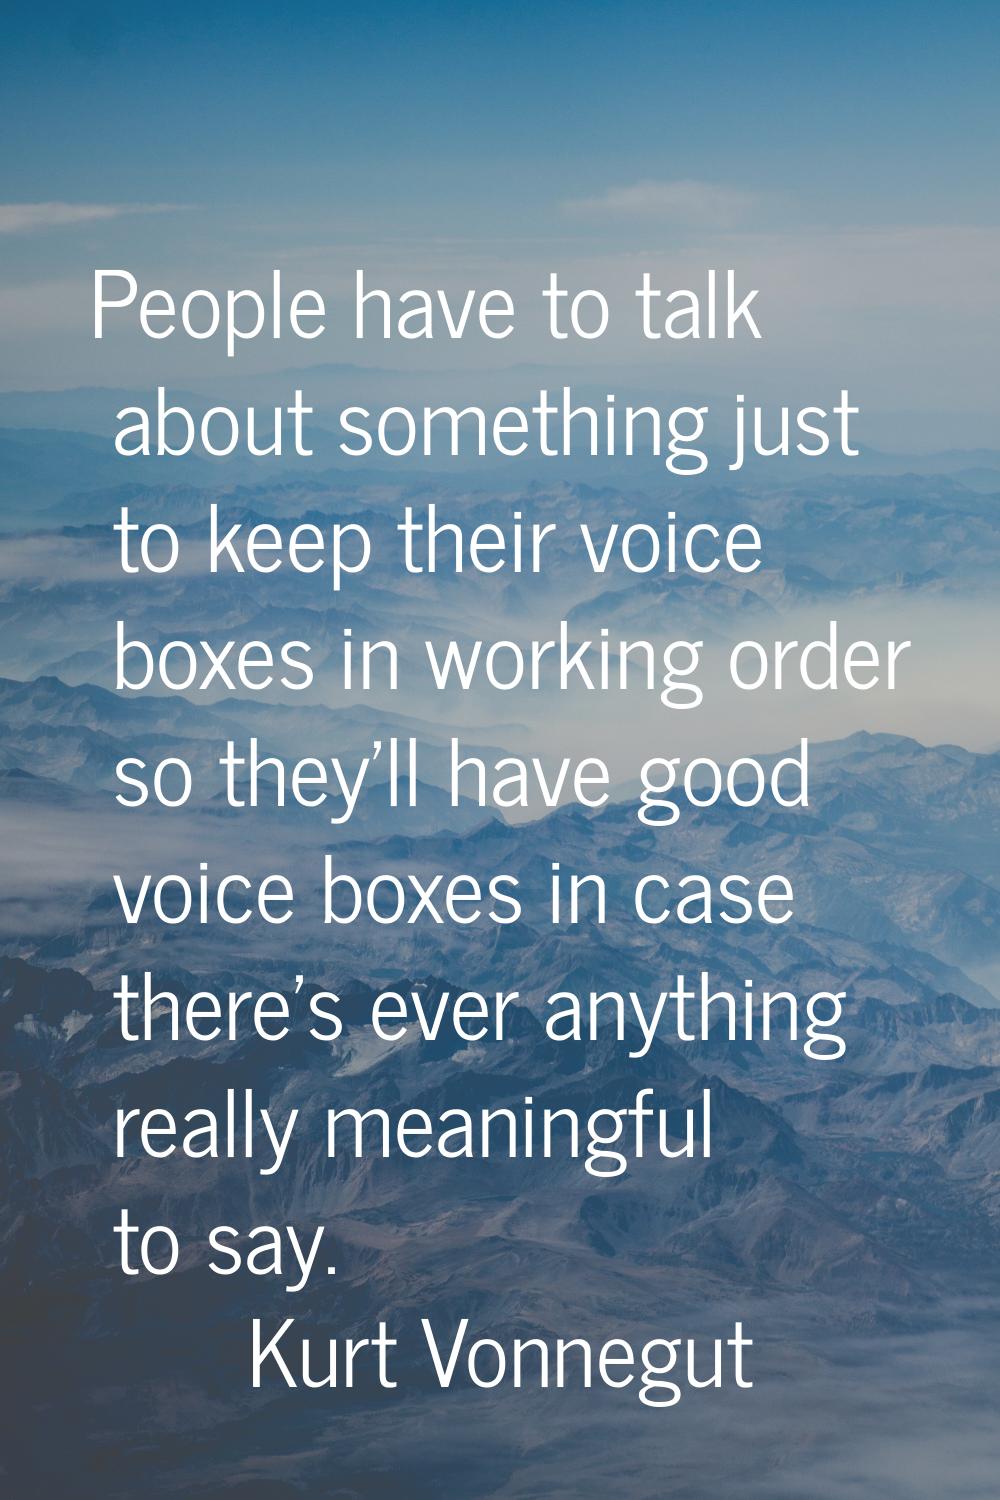 People have to talk about something just to keep their voice boxes in working order so they'll have